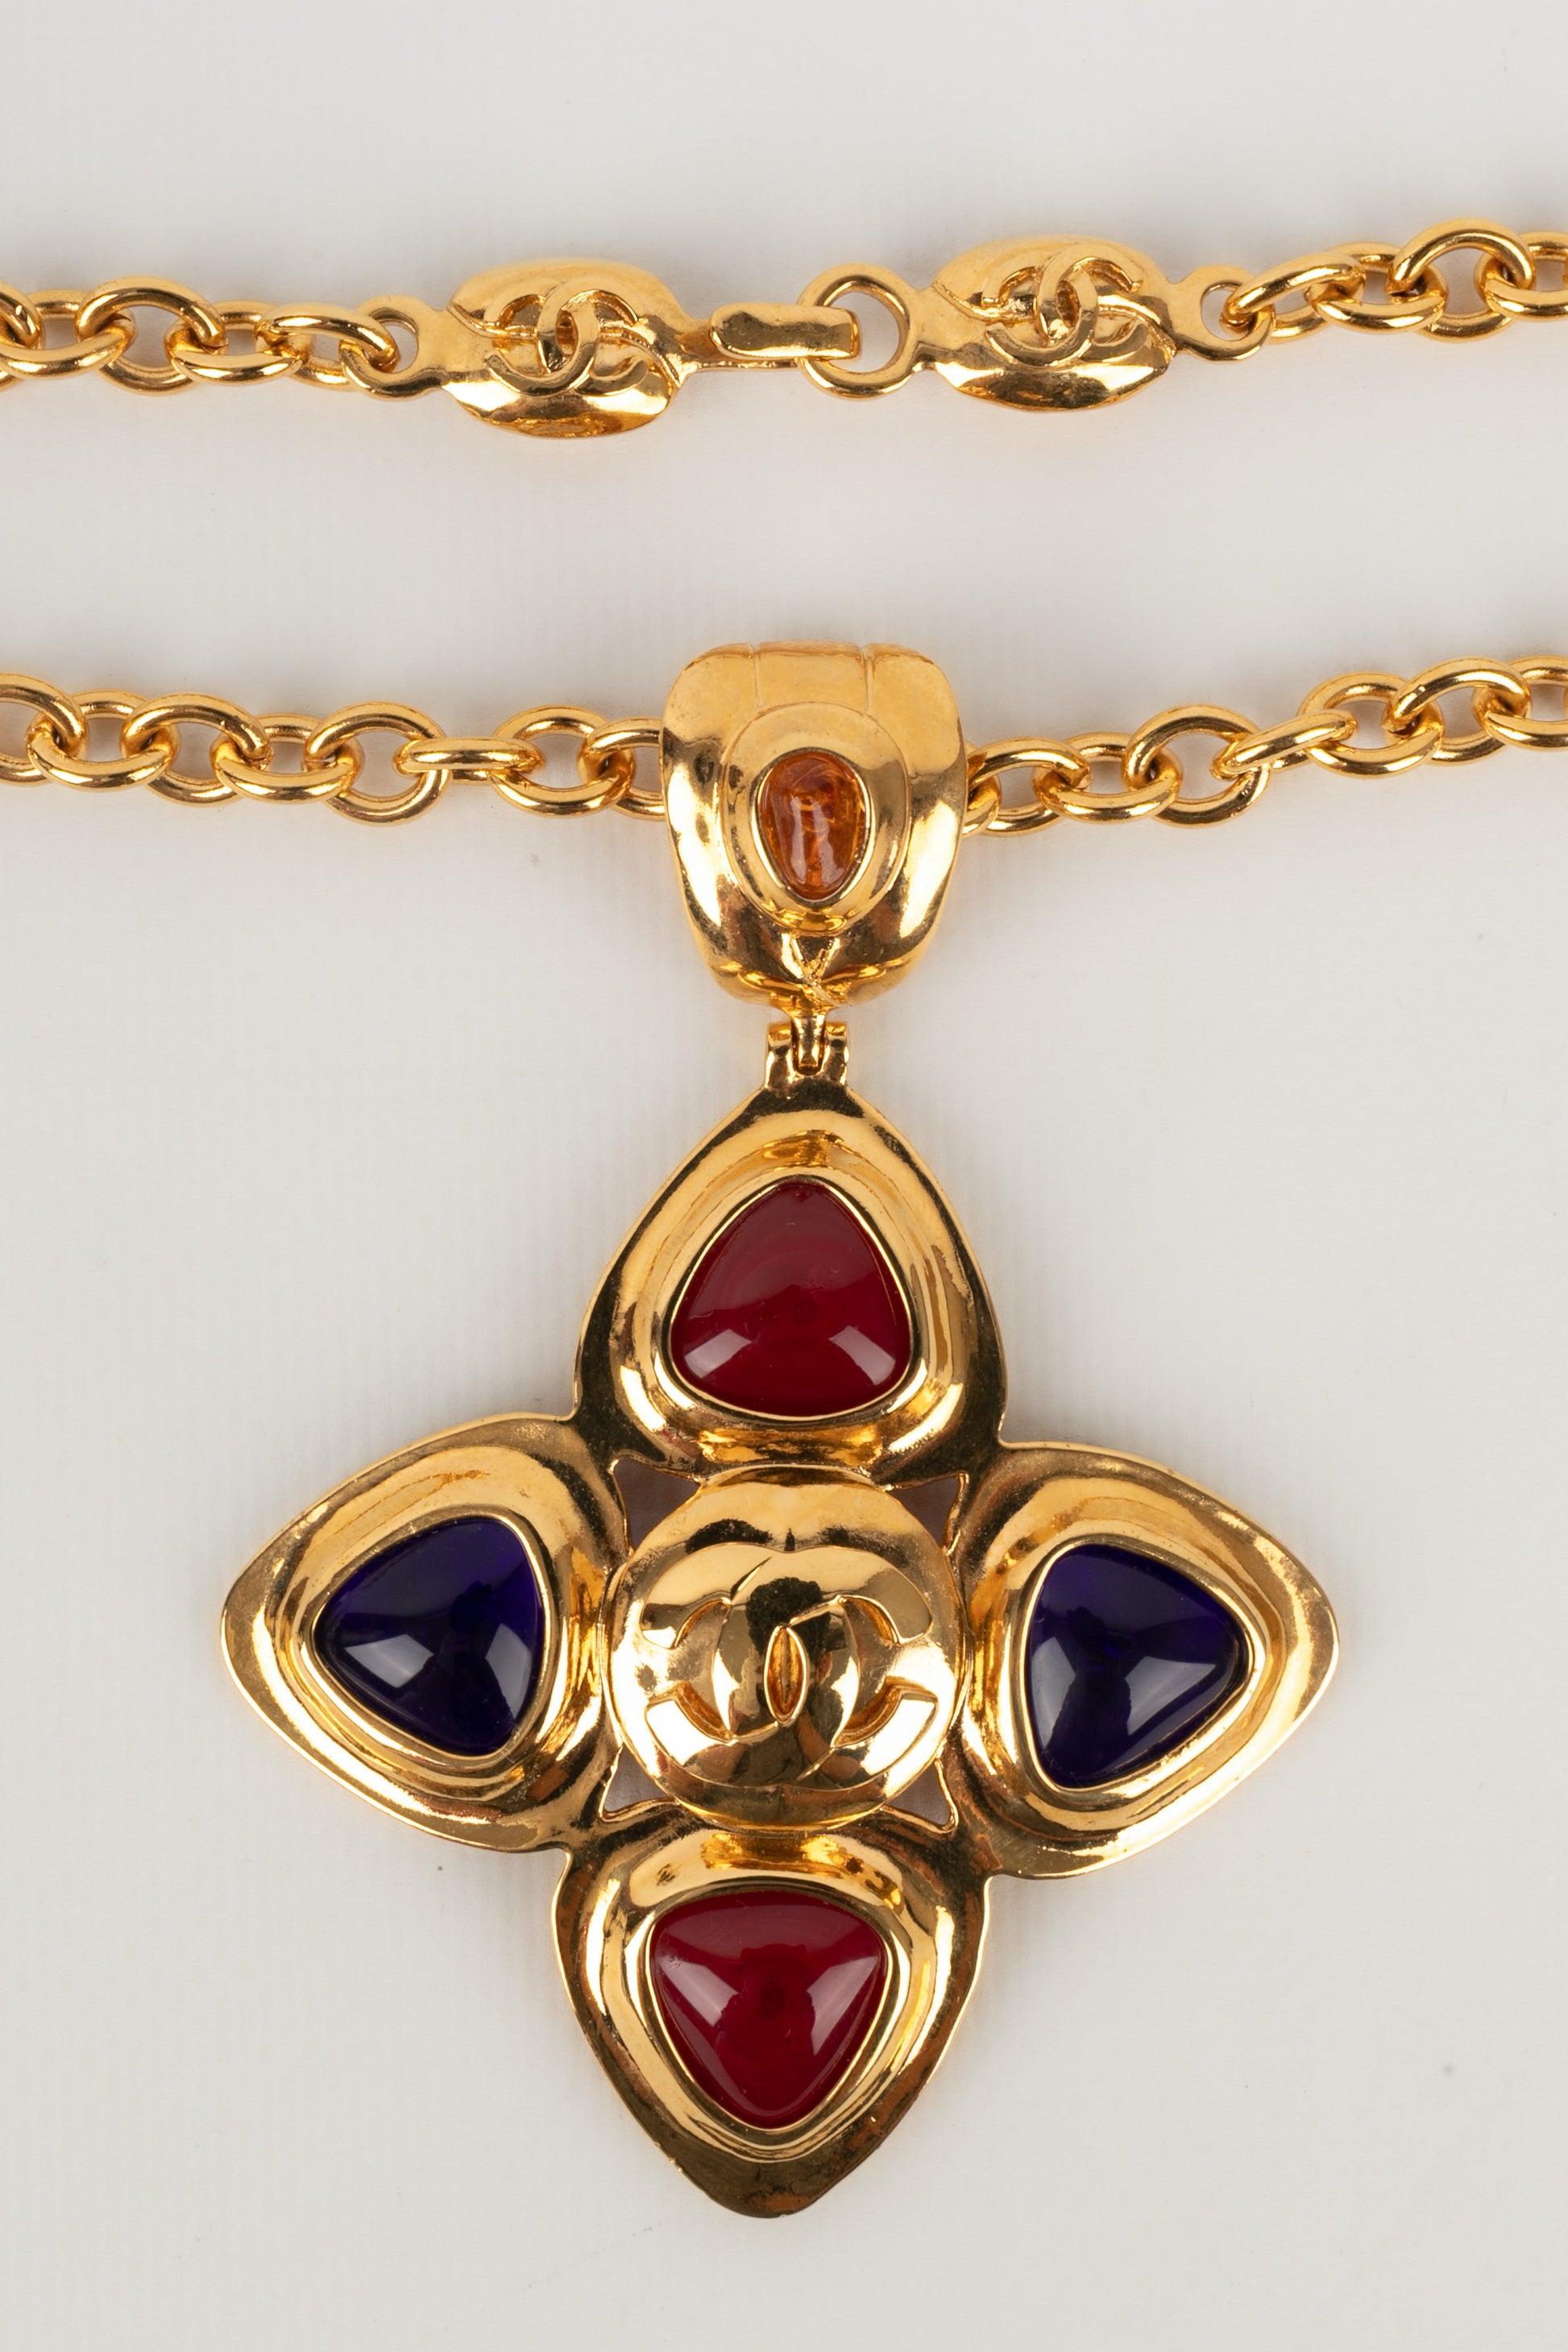 Chanel (Made in France) Golden metal necklace with a blue and red glass paste pendant. 1997 Fall-Winter Collection. Work from the Woloch atelier for the House of Chanel.

Additional Information:
Condition: Very good condition
Dimensions: Length: 52